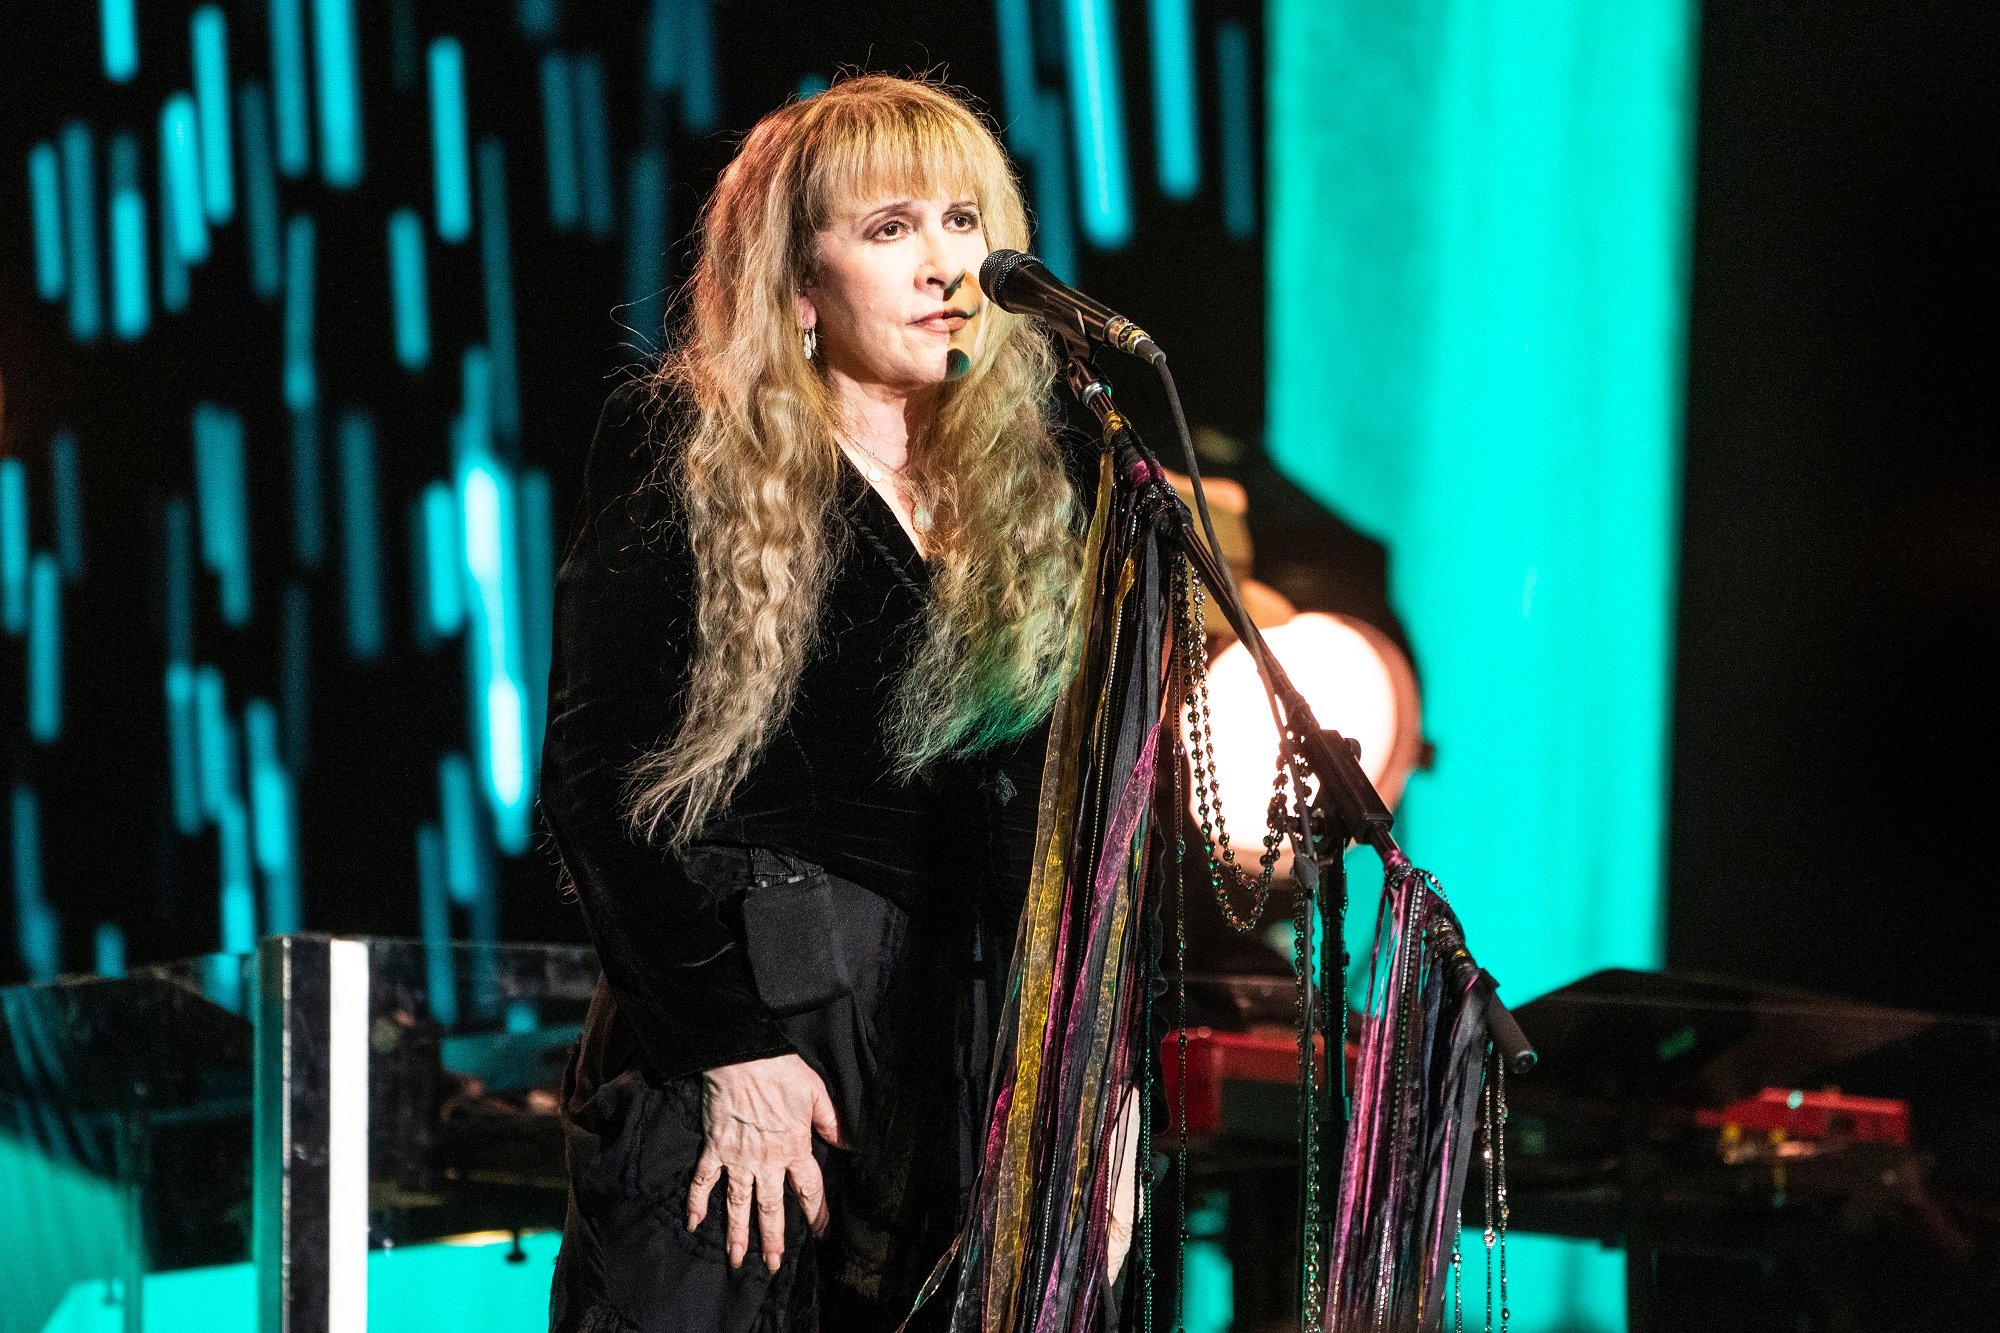 Stevie Nicks stands in front of a microphone stand while wearing a black dress